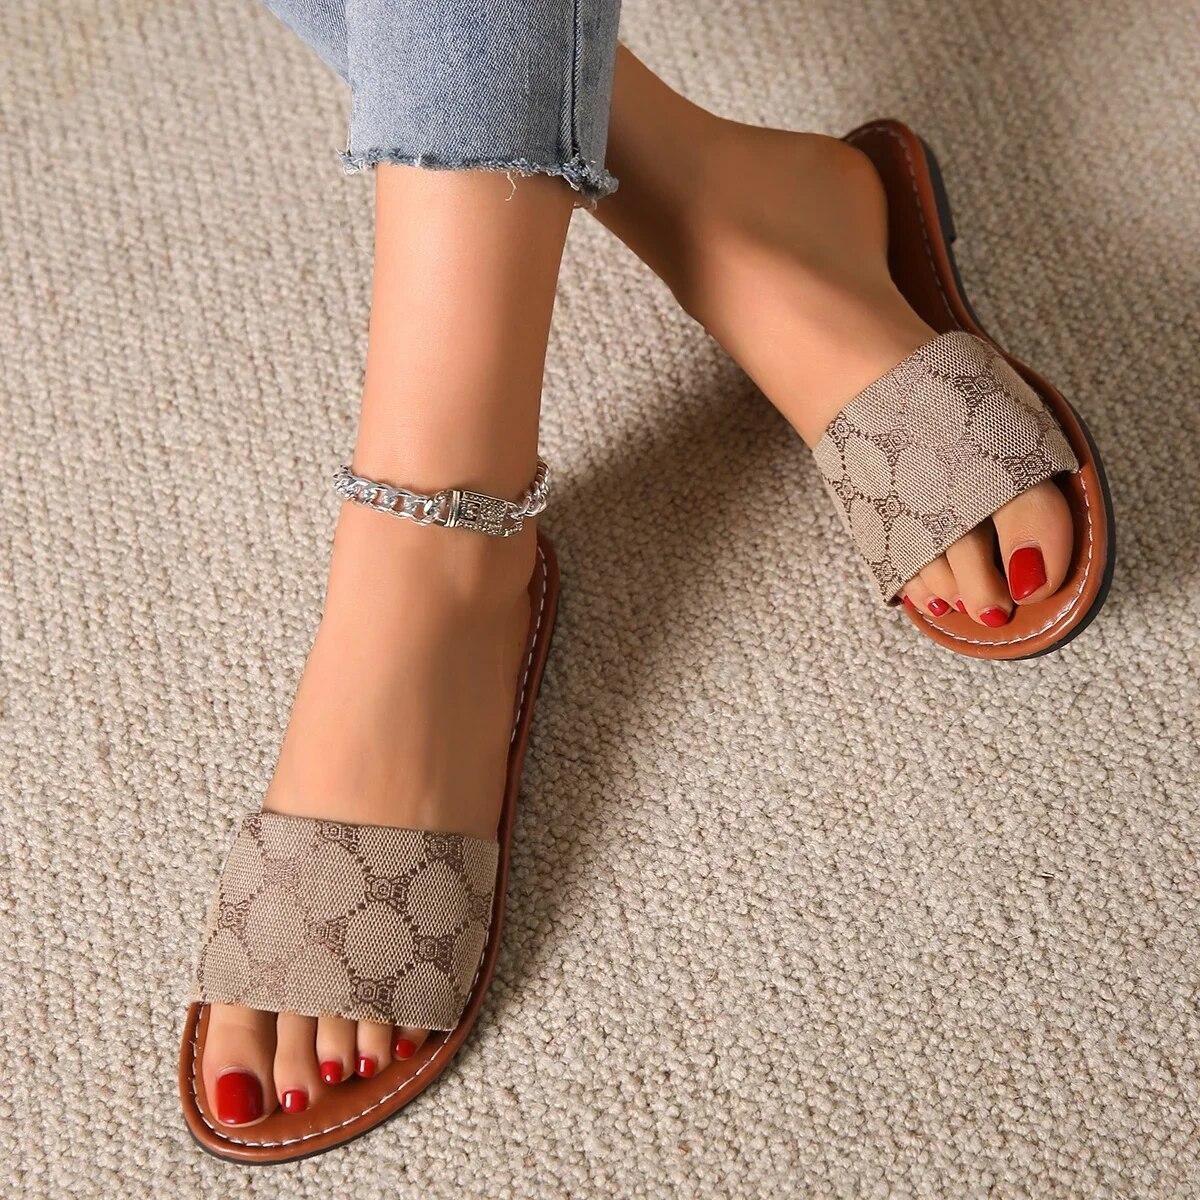 Cloth Slippers For Women Shoes Flat Sandals Peep Toe Ladies Casual Slides Female Beach Slippers Flat Shoes